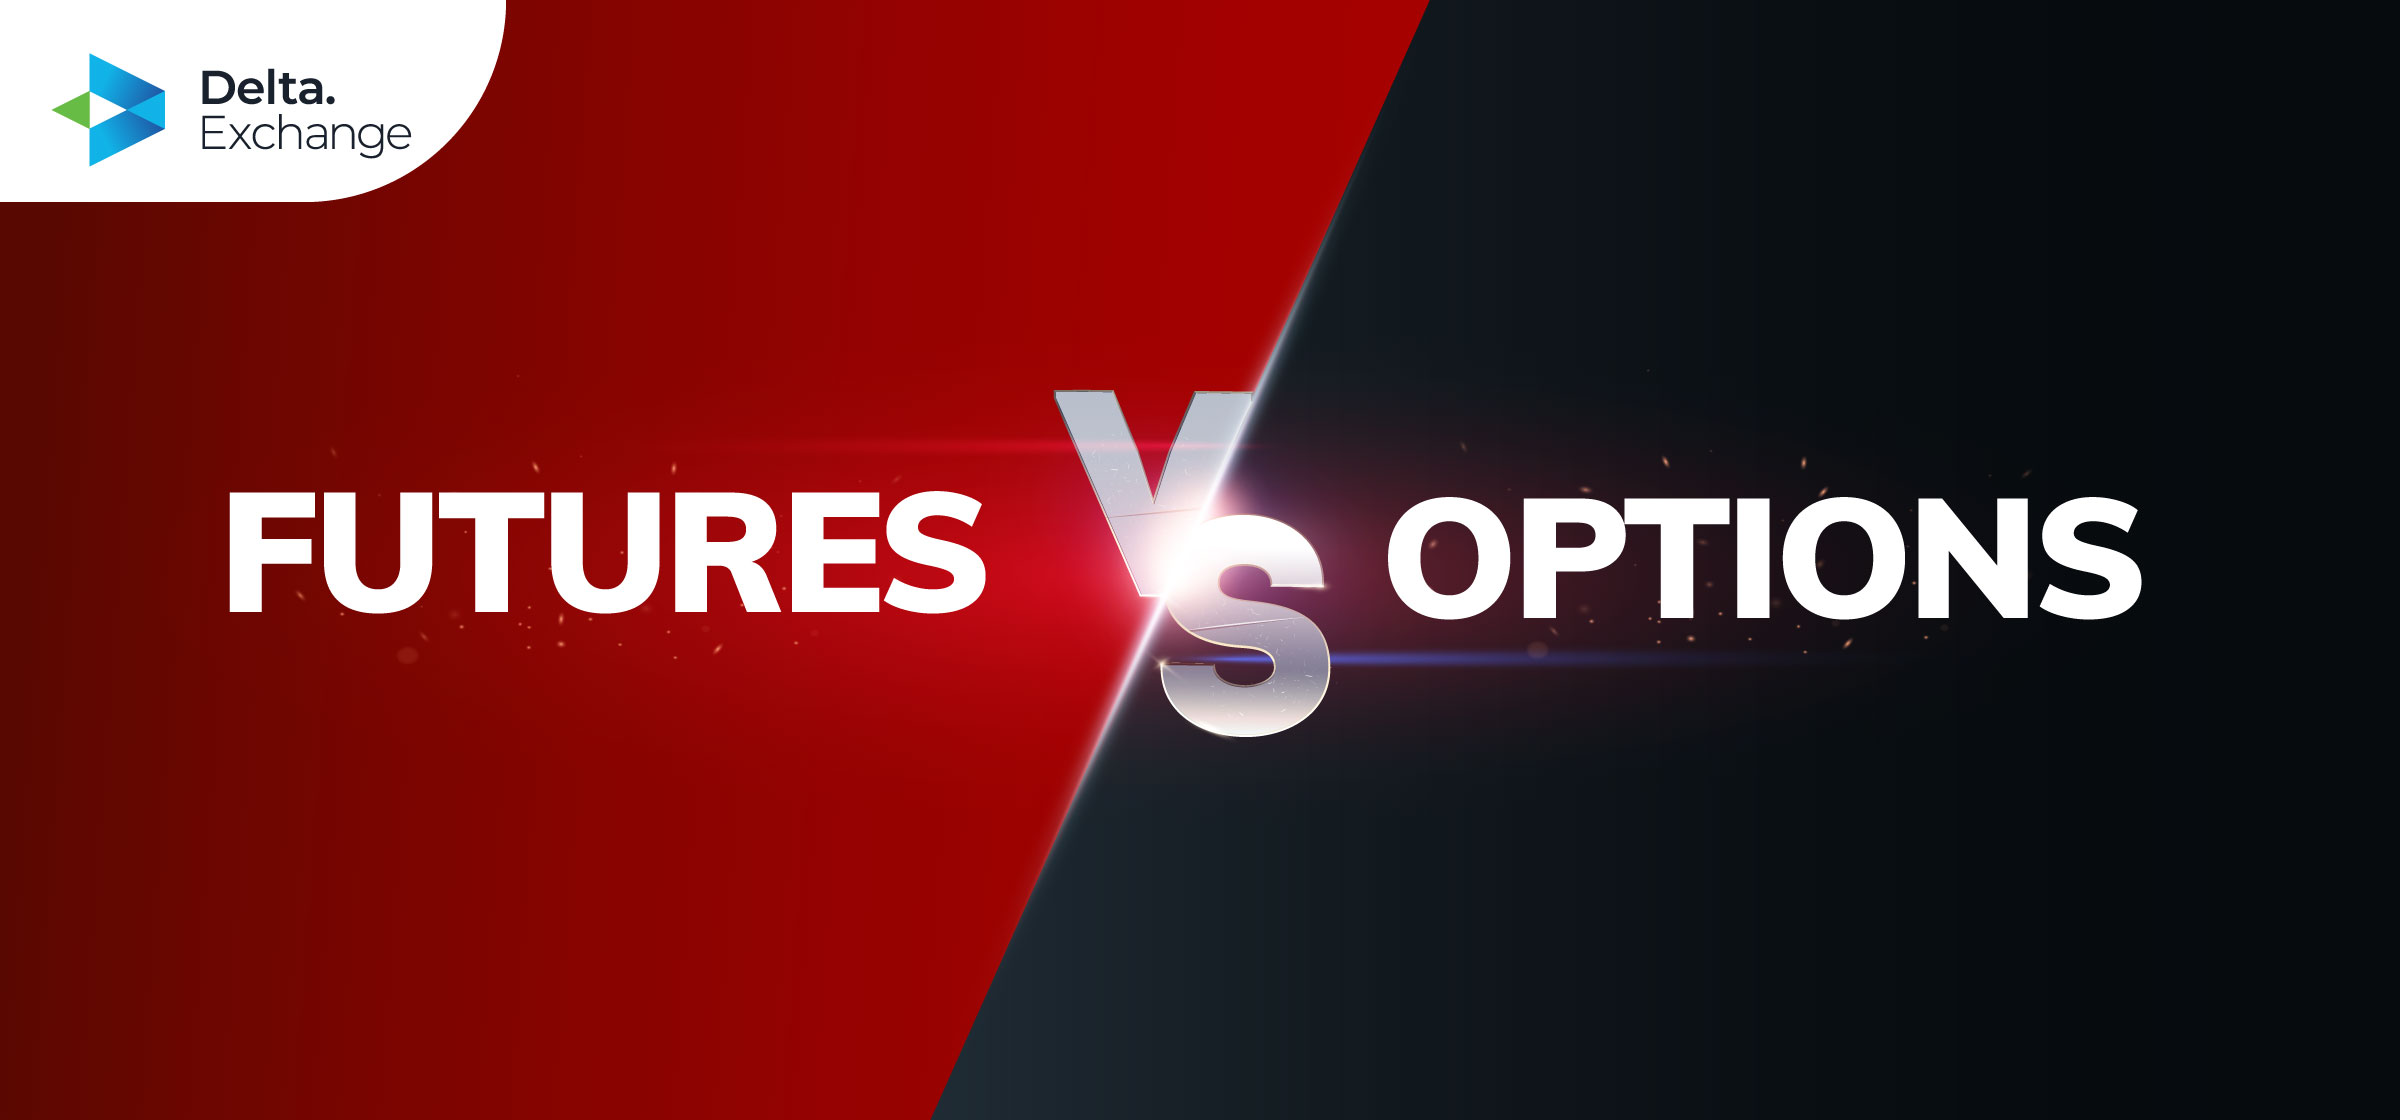 futures-vs-options-what-should-you-trade-why